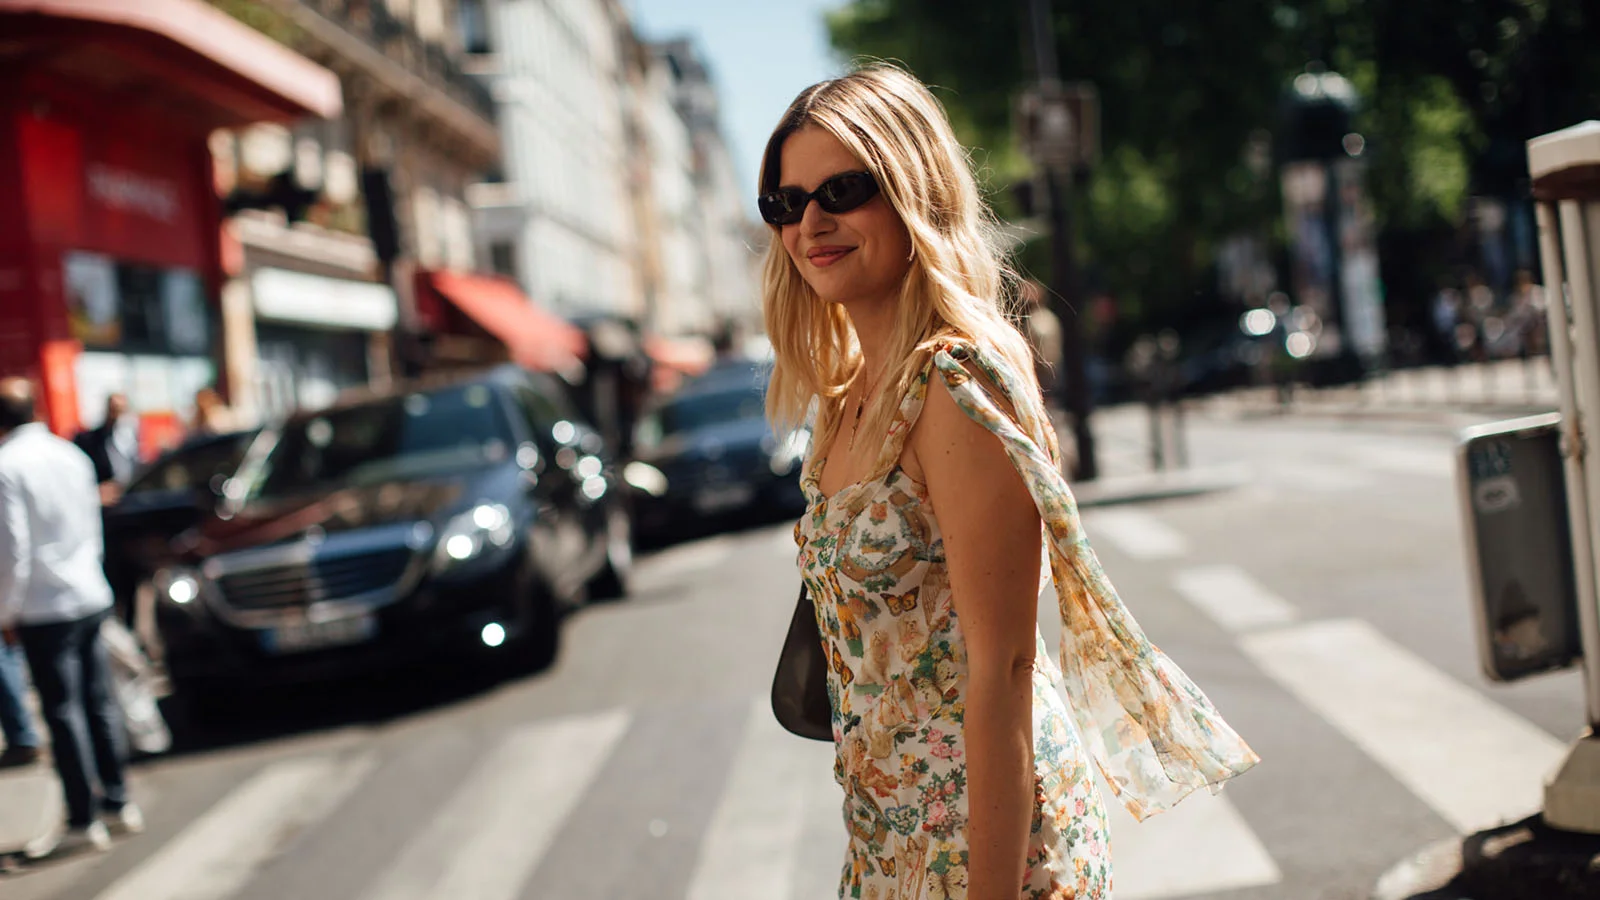 Women's Travel Dresses for Every Occasion